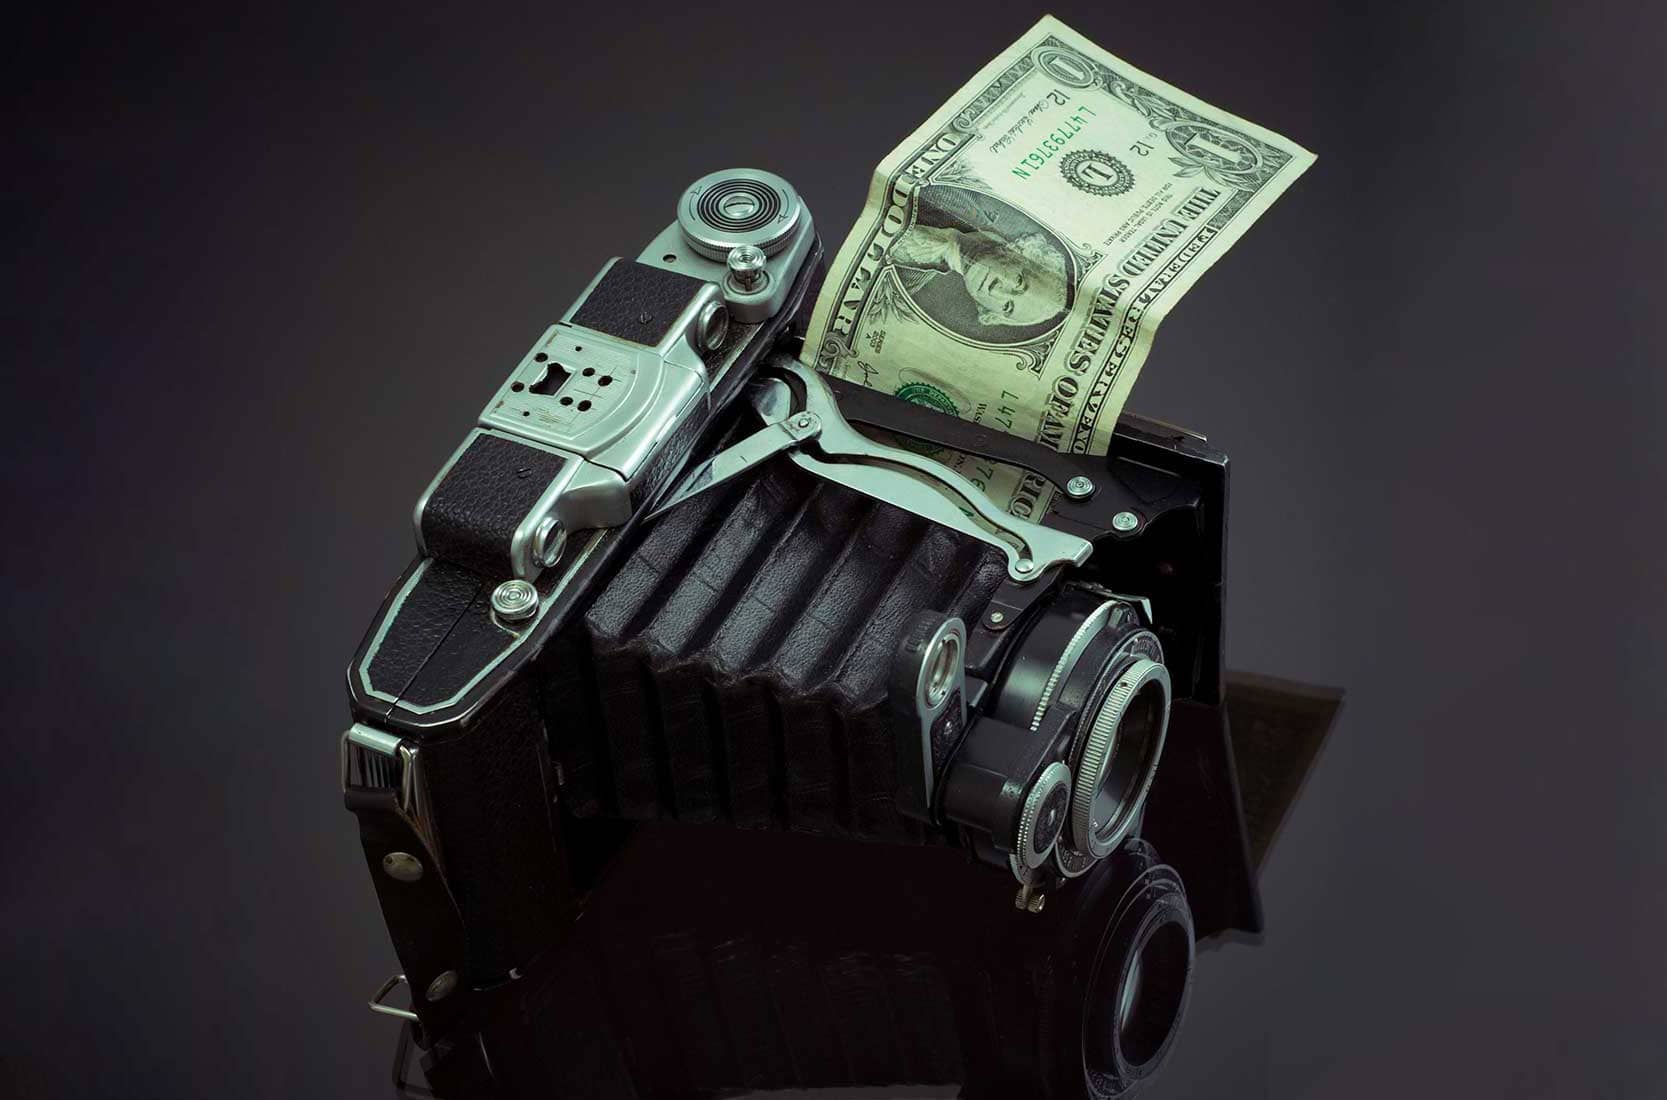 Vintage camera with a dollar bill sticking out